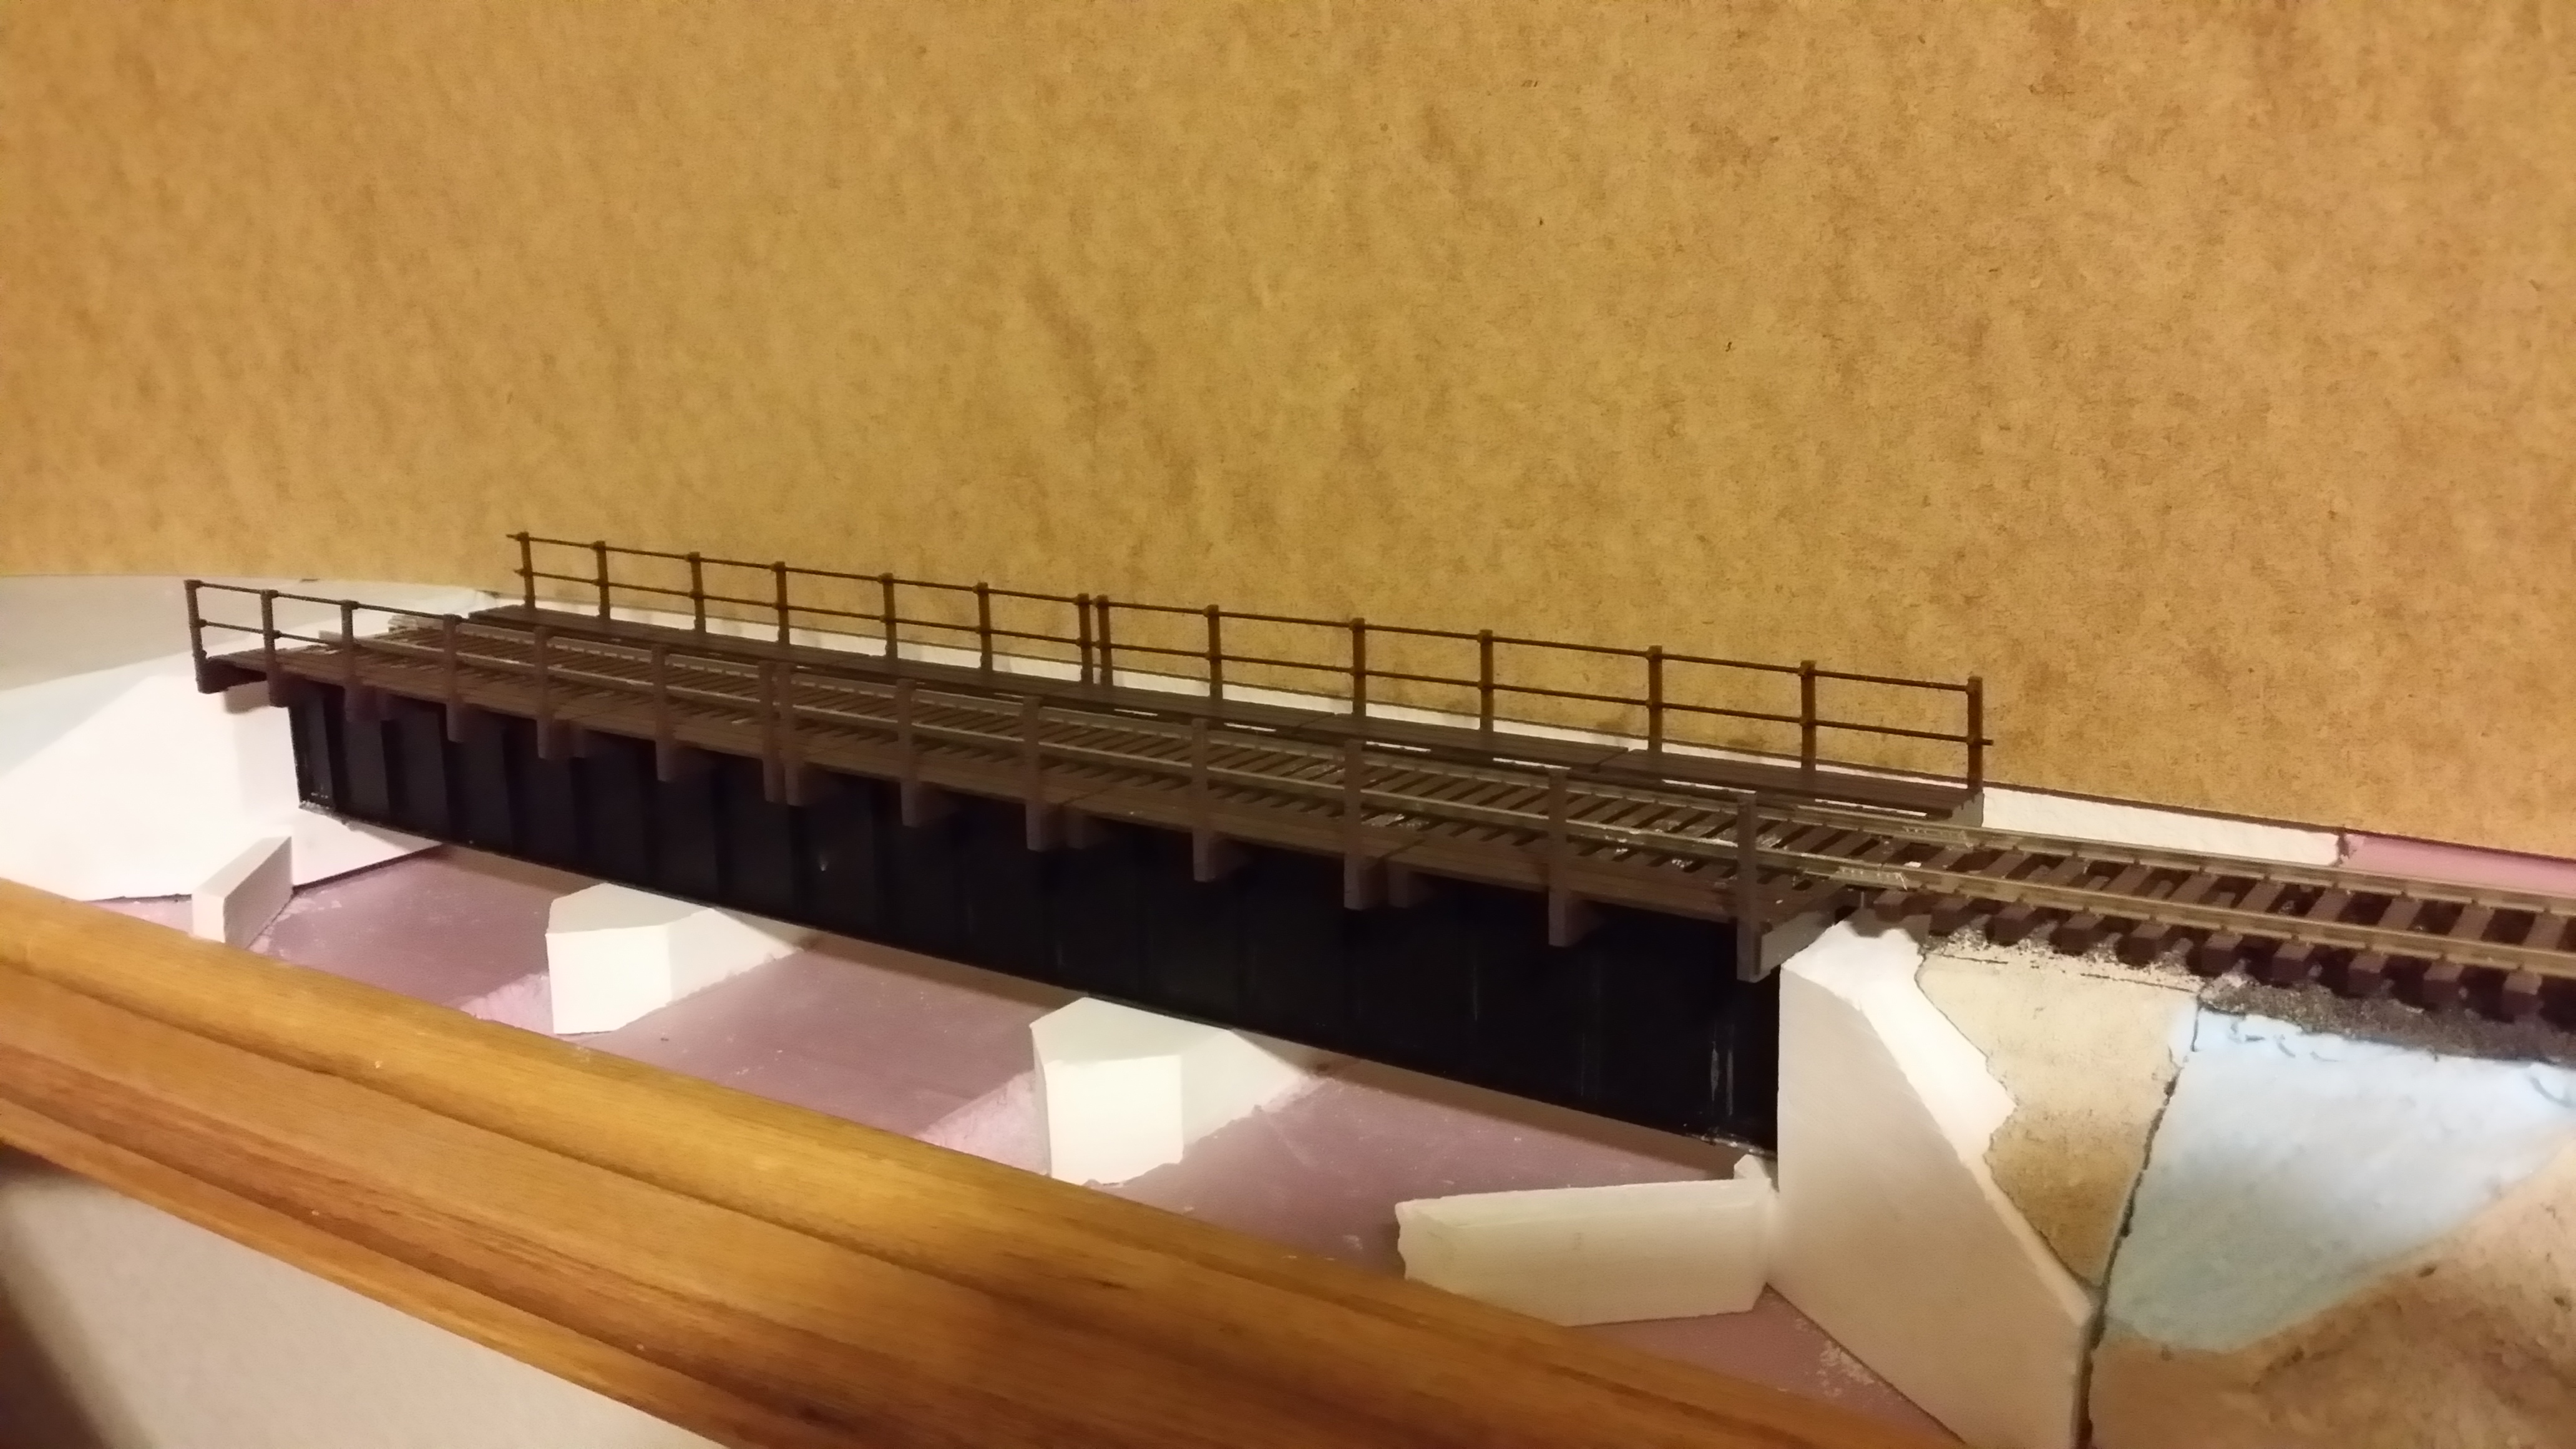  Range Division on Rick Trinkle’s O Scale Colorado Joint Line layout